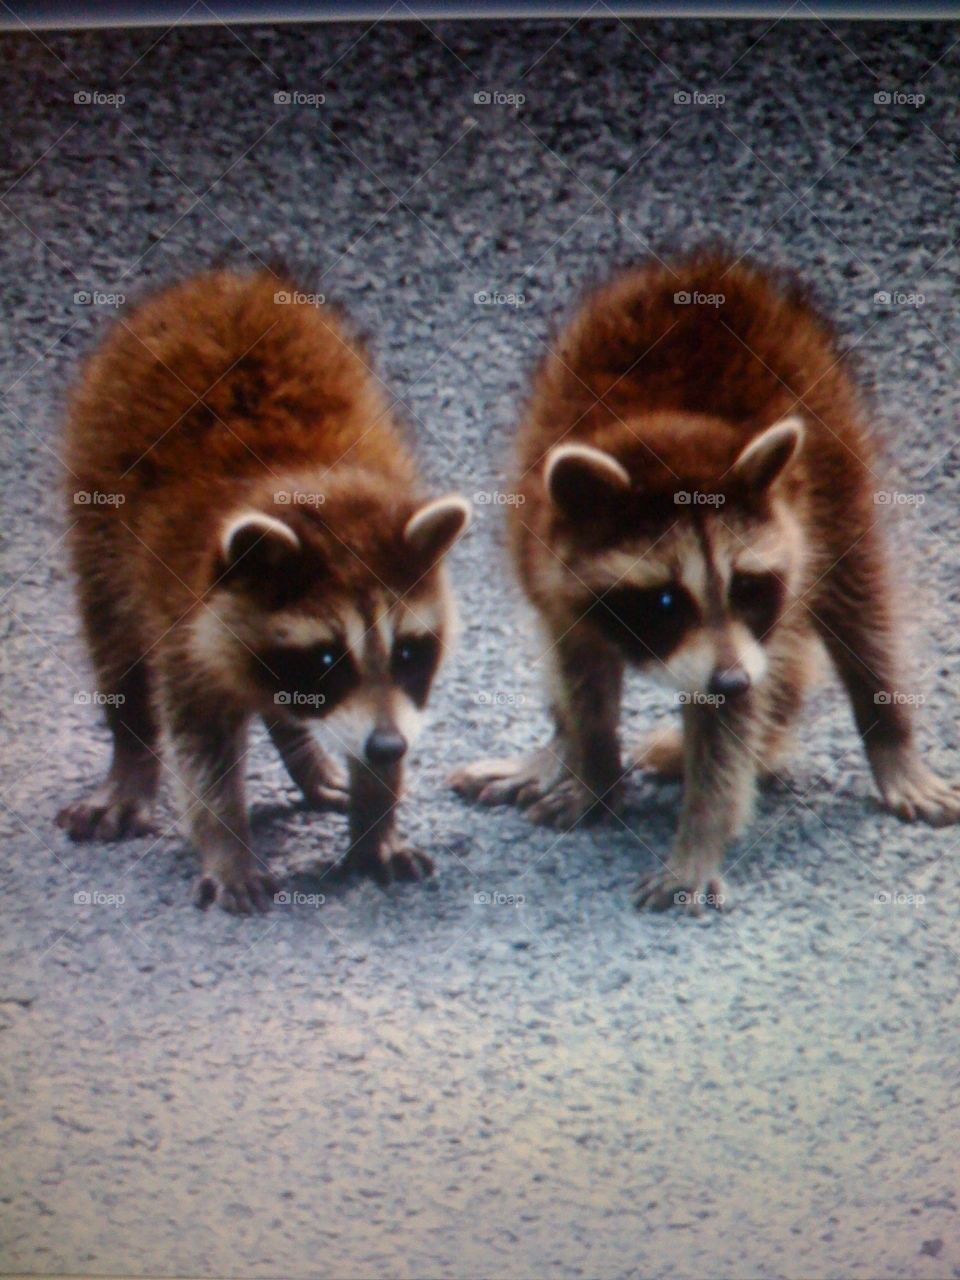 Two masked bandits in our driveway